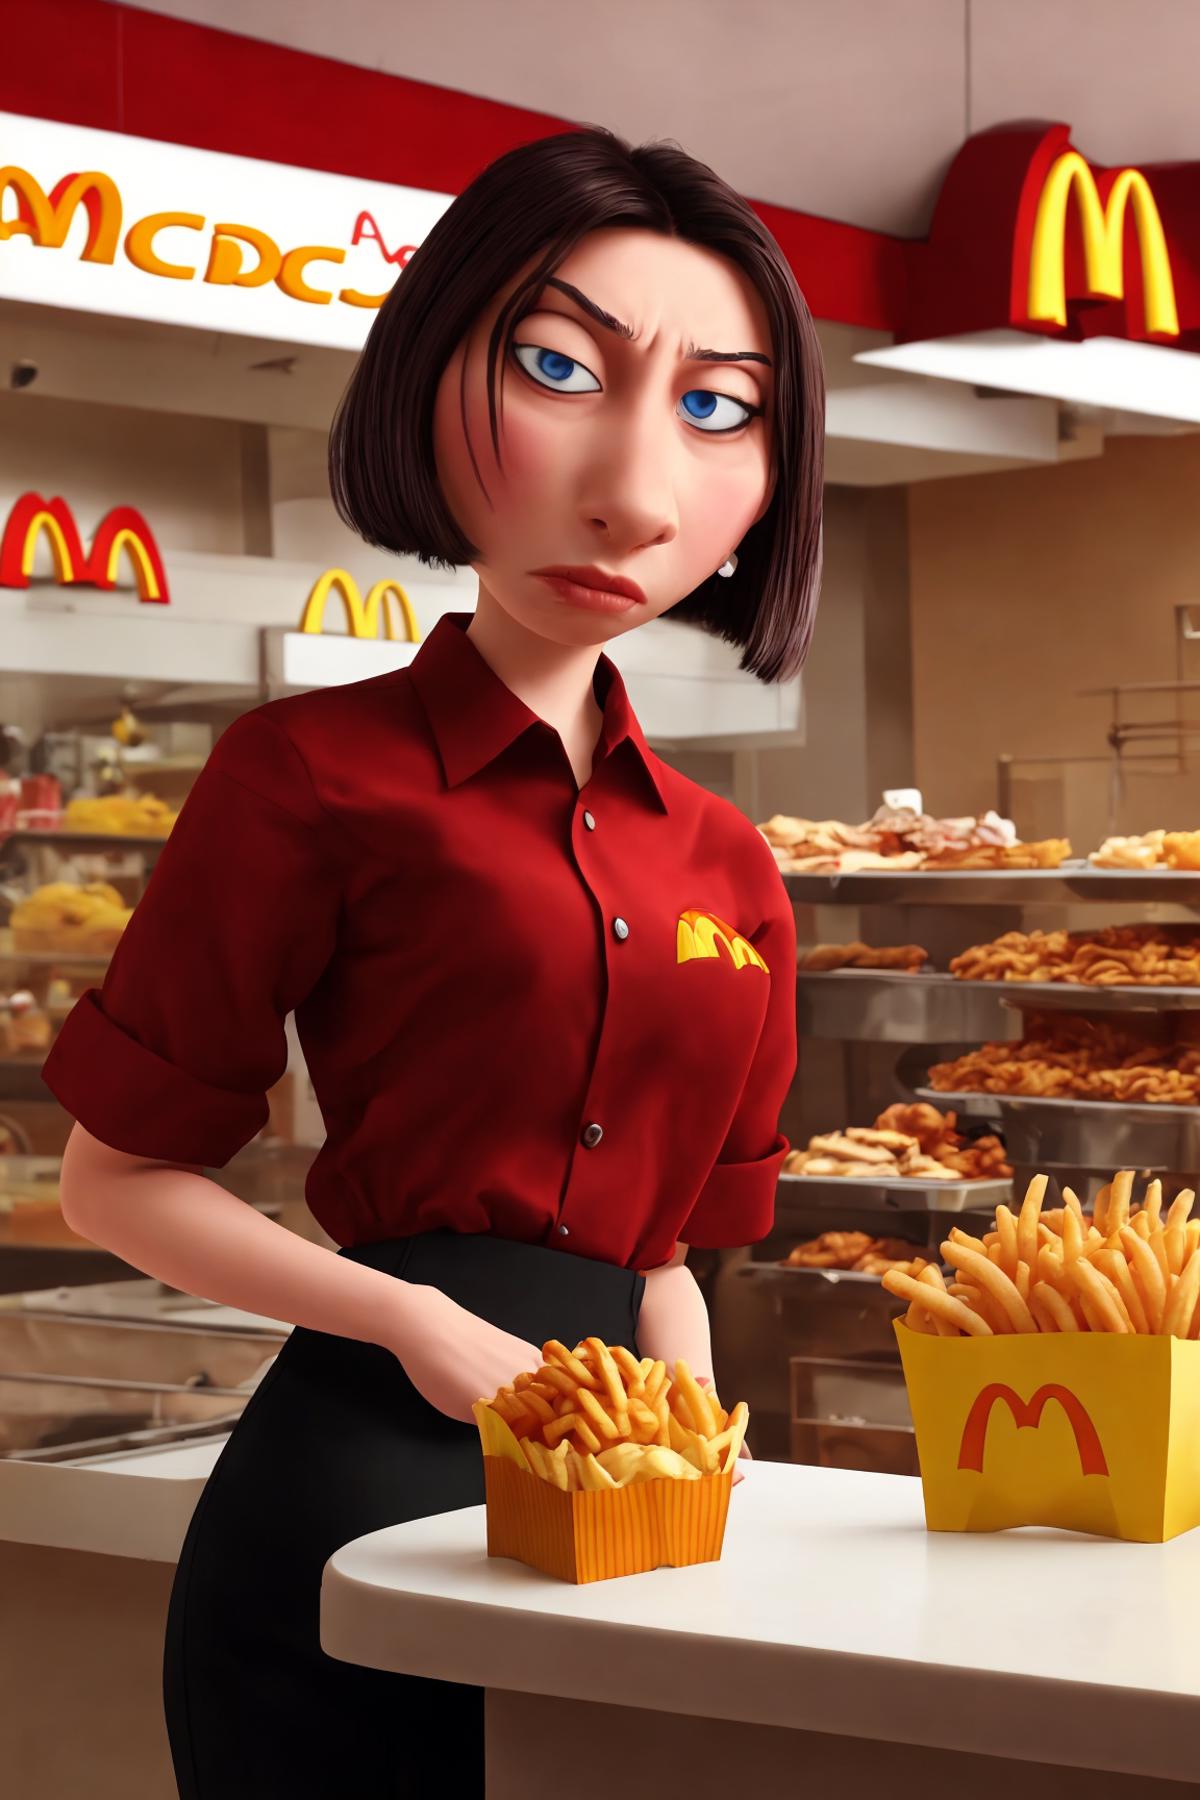 Woman in a red shirt and black skirt stands in front of a McDonald's counter with a box of fries.